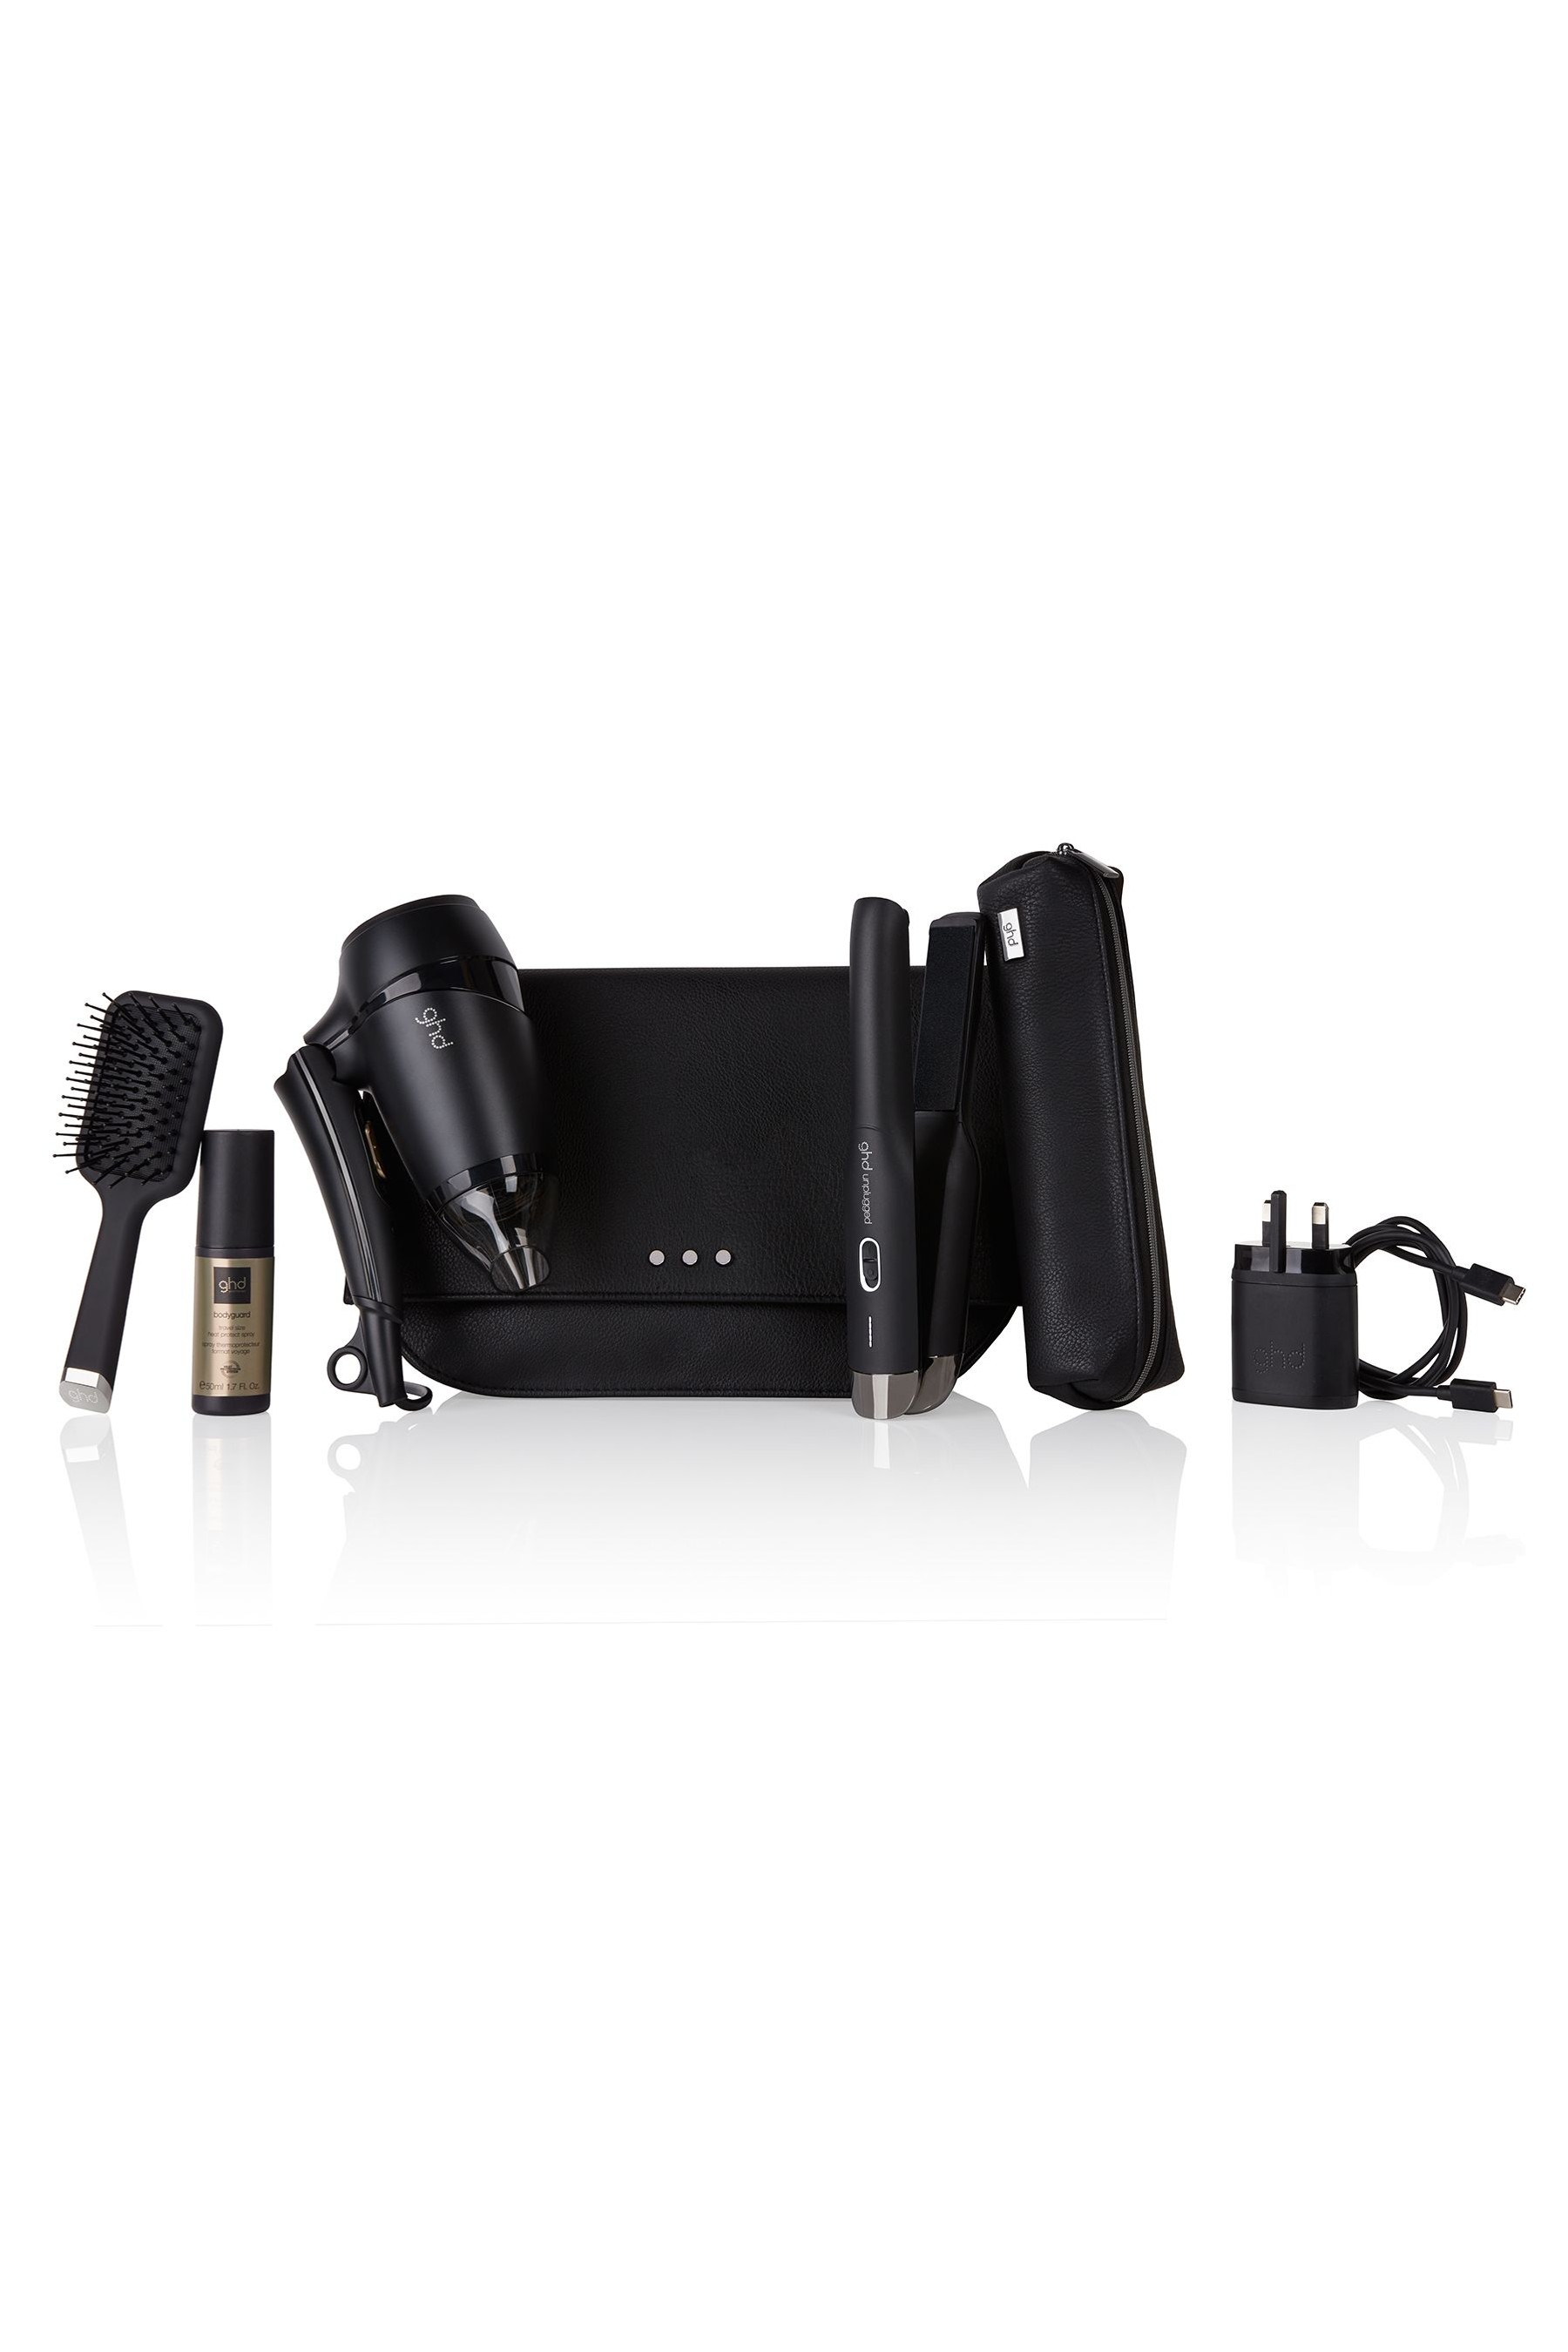 Buy ghd Unplugged & Flight Gift Set - Cordless Hair Straightener & Travel  Hair Dryer from the AcbShops online shop